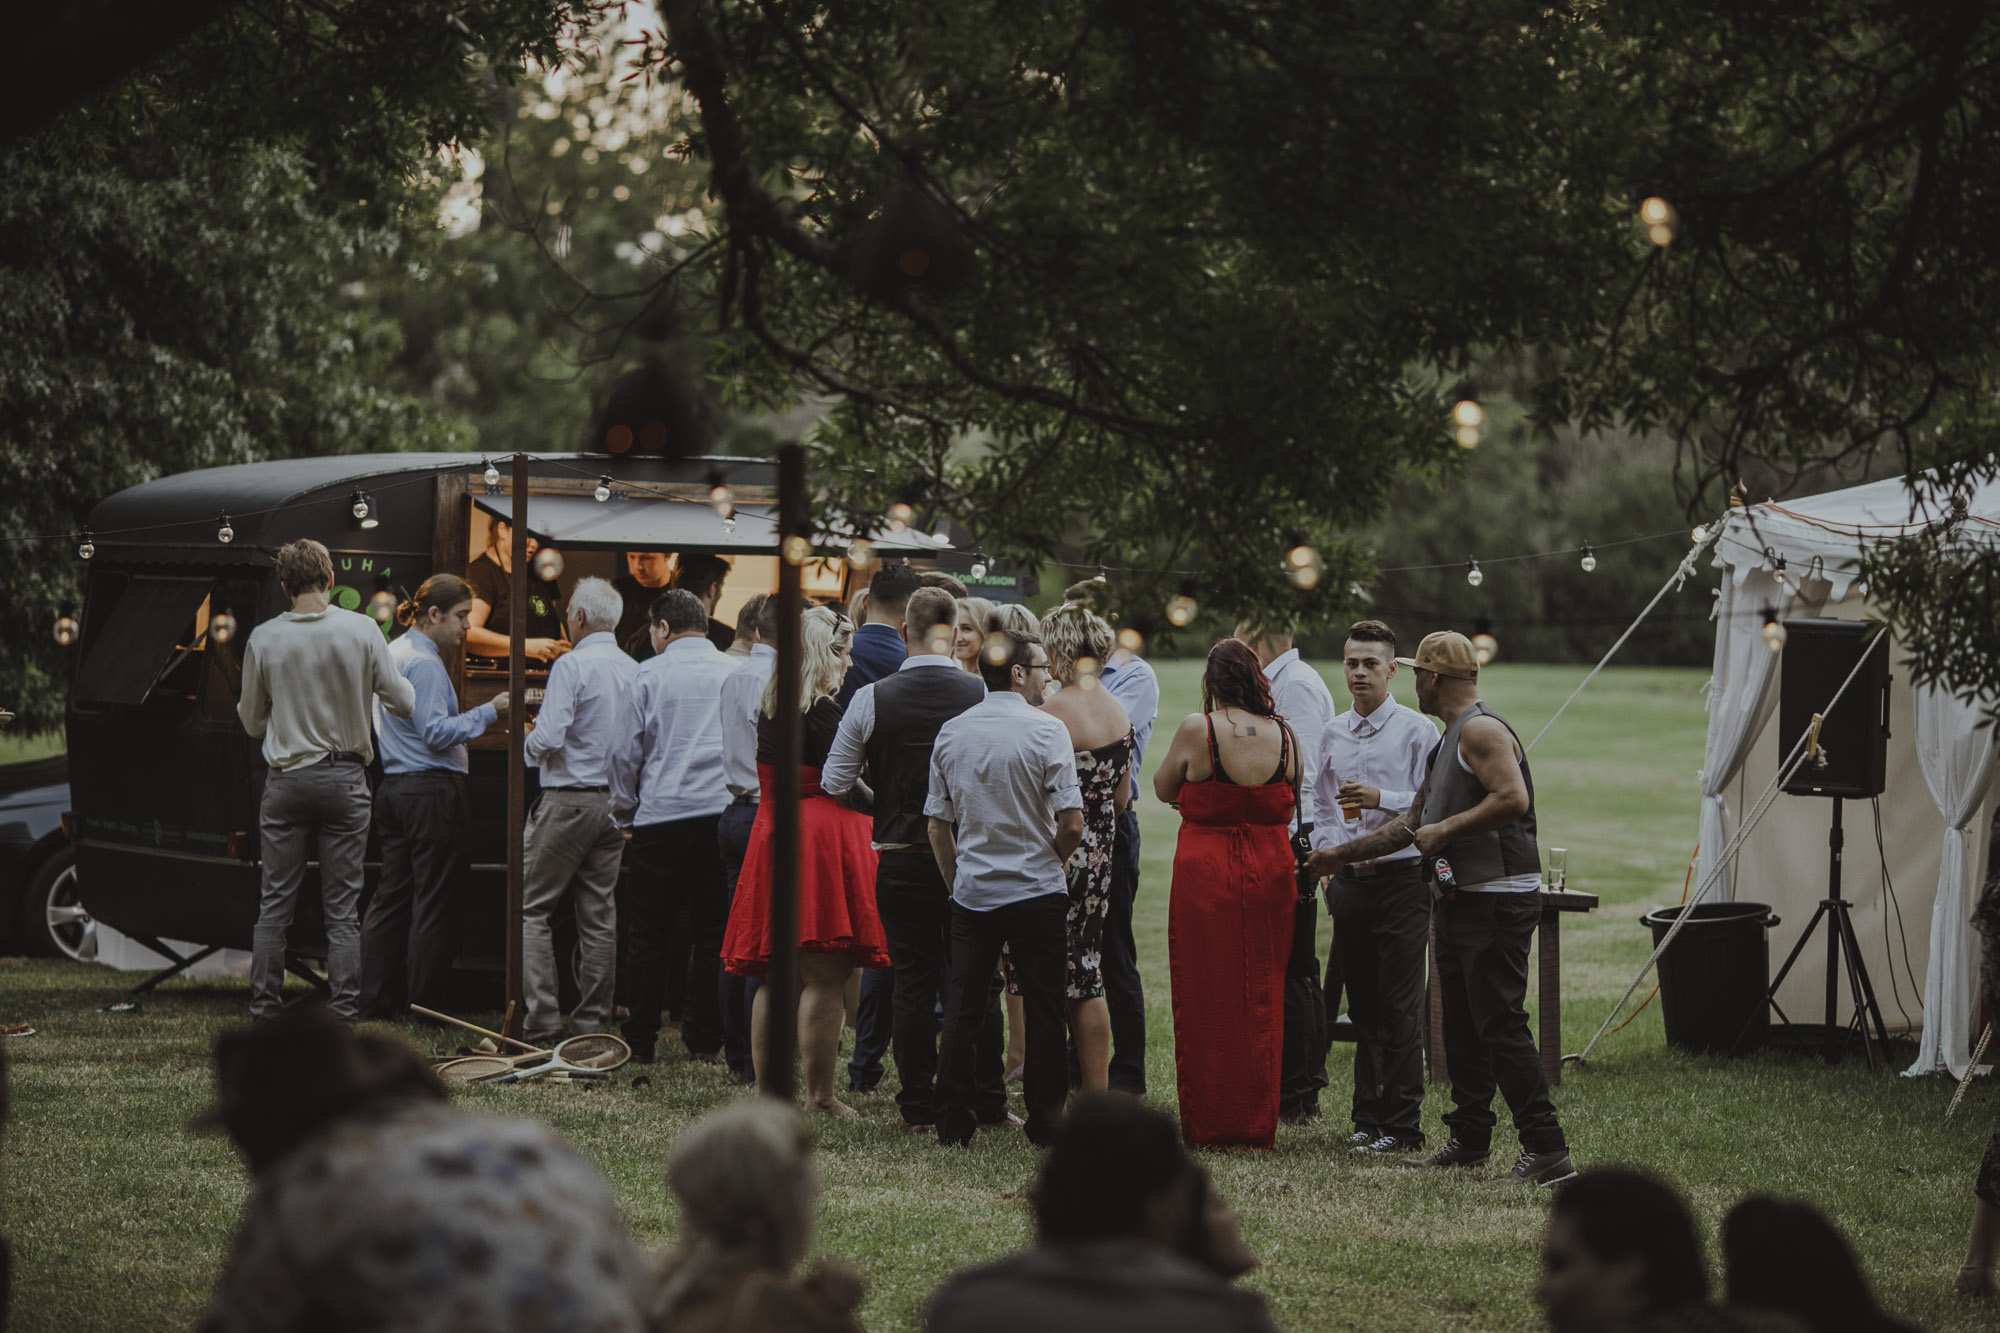 57 A low key New Zealand Estate wedding with a bohemian vintage vibe